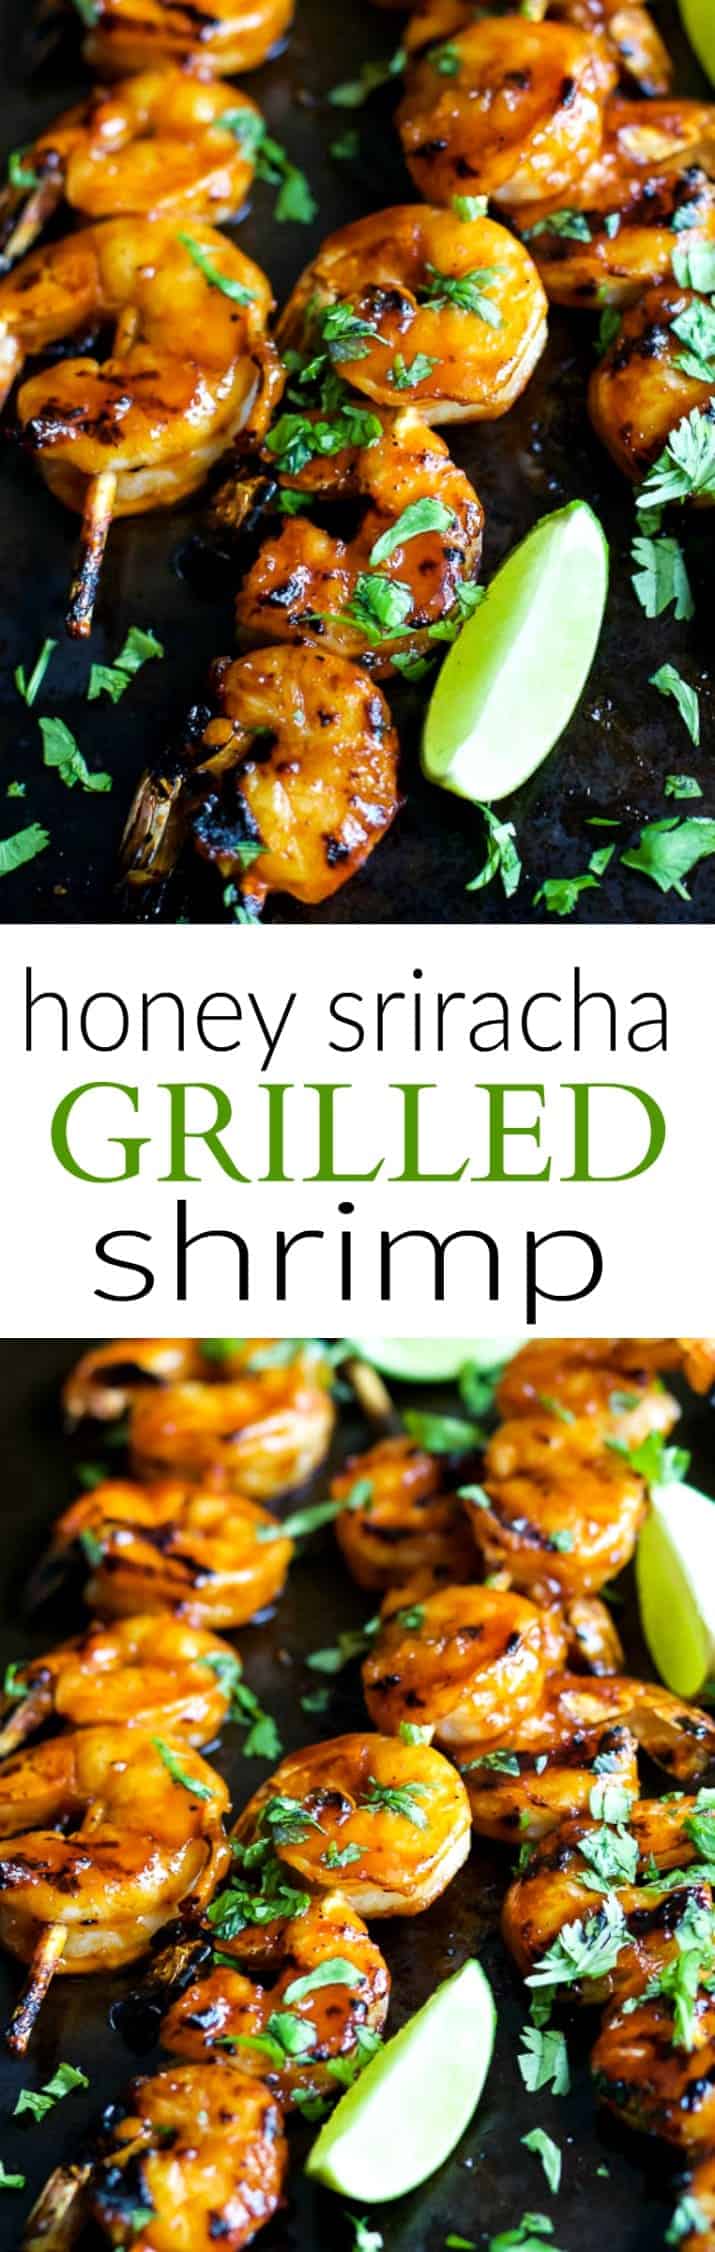 A collage of two images of honey sriracha shrimp with a lime wedge and chopped parsley